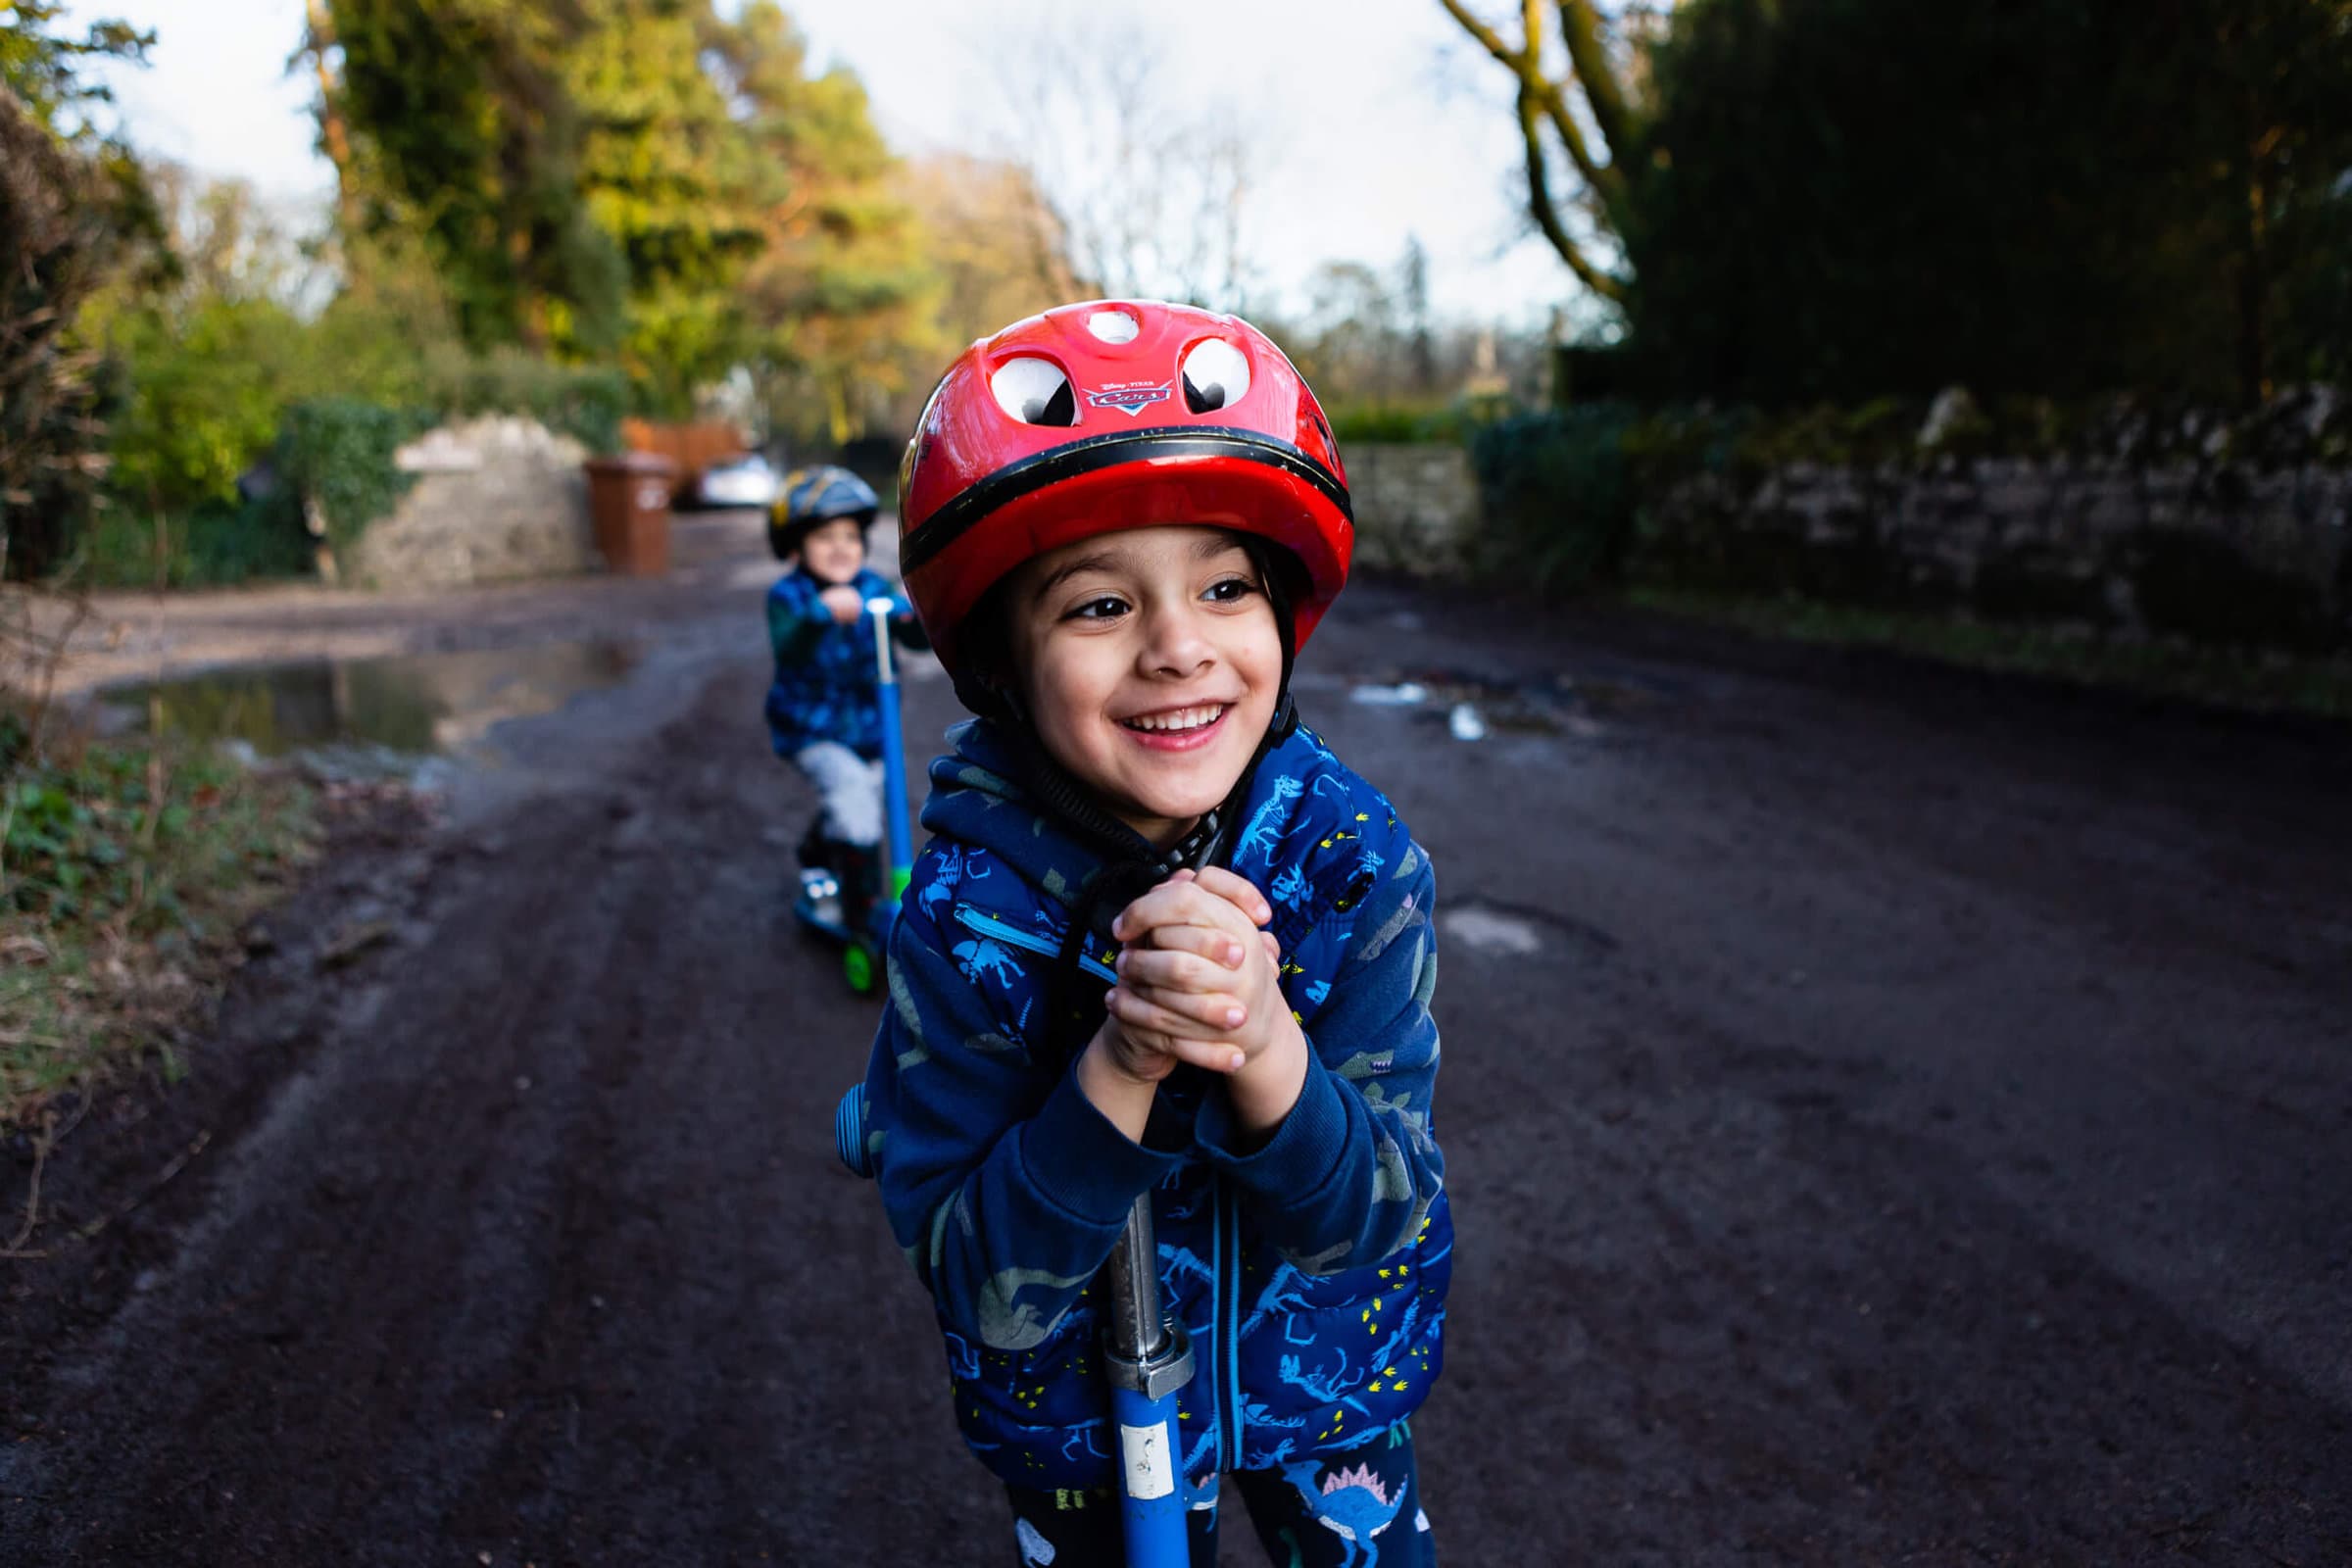 A very happy looking young boy on his scooter with his brother behind | Family photographer Bristol